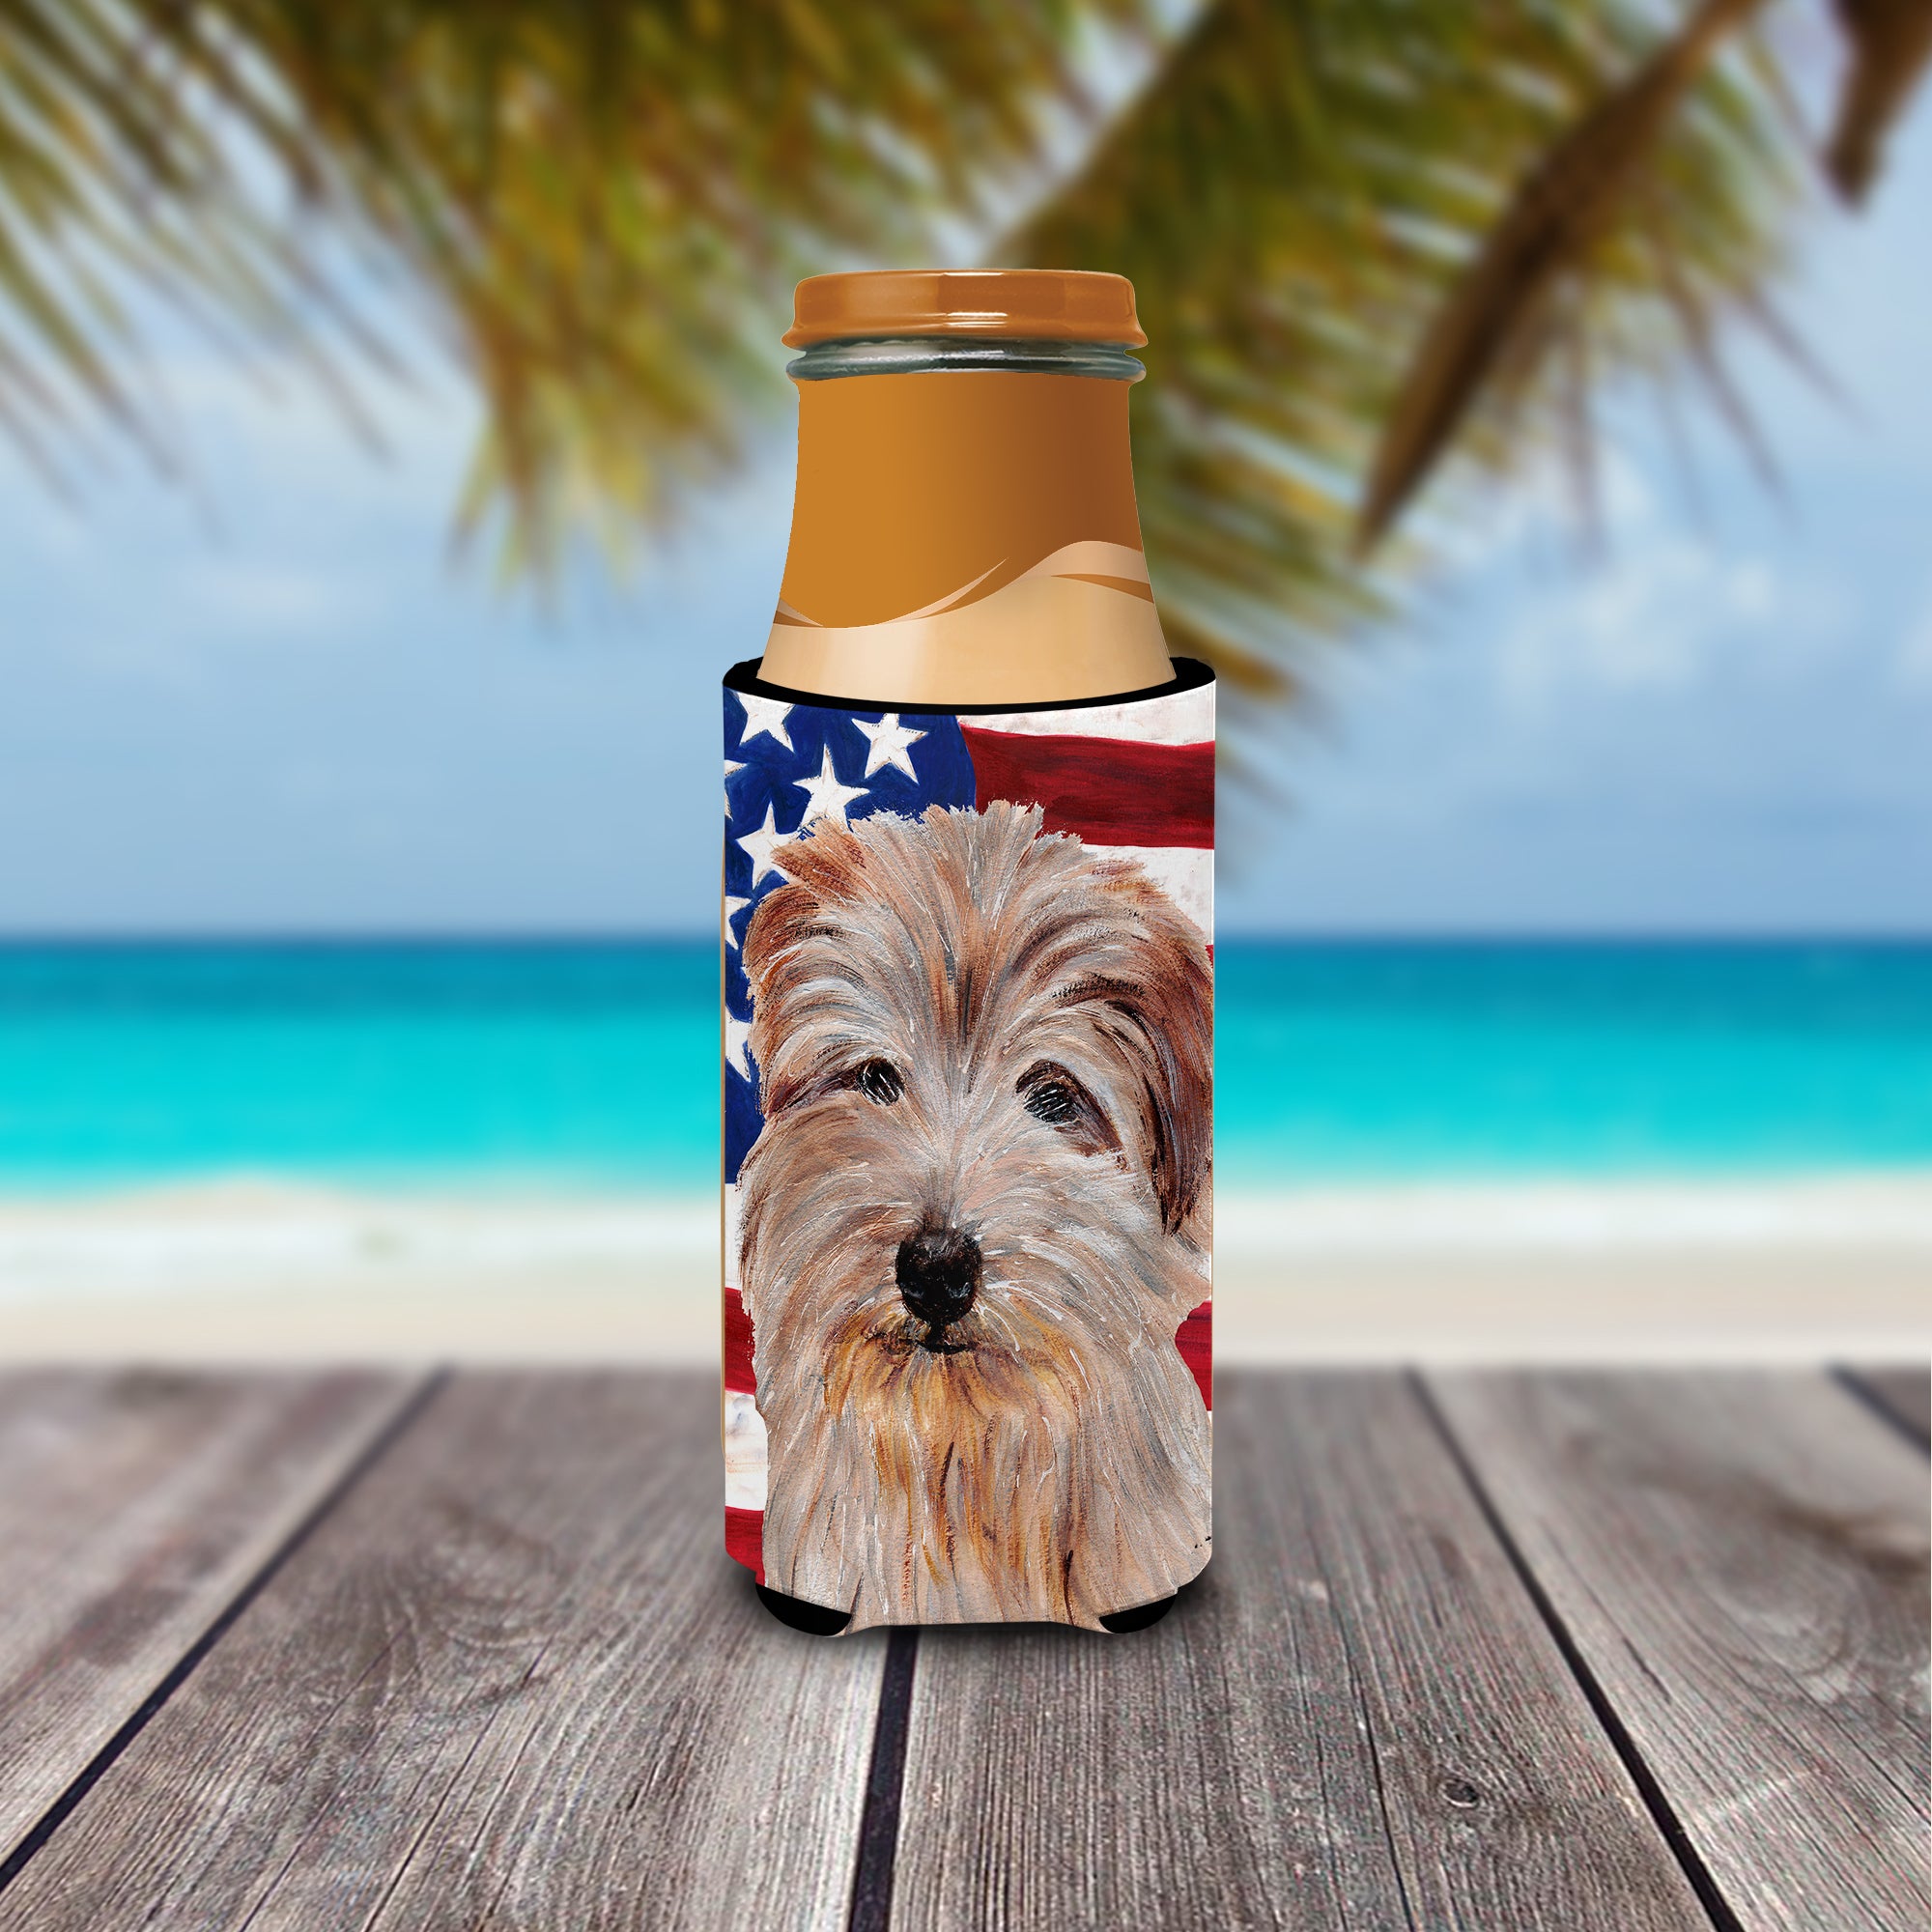 Norfolk Terrier with American Flag USA Ultra Beverage Insulators for slim cans SC9640MUK.